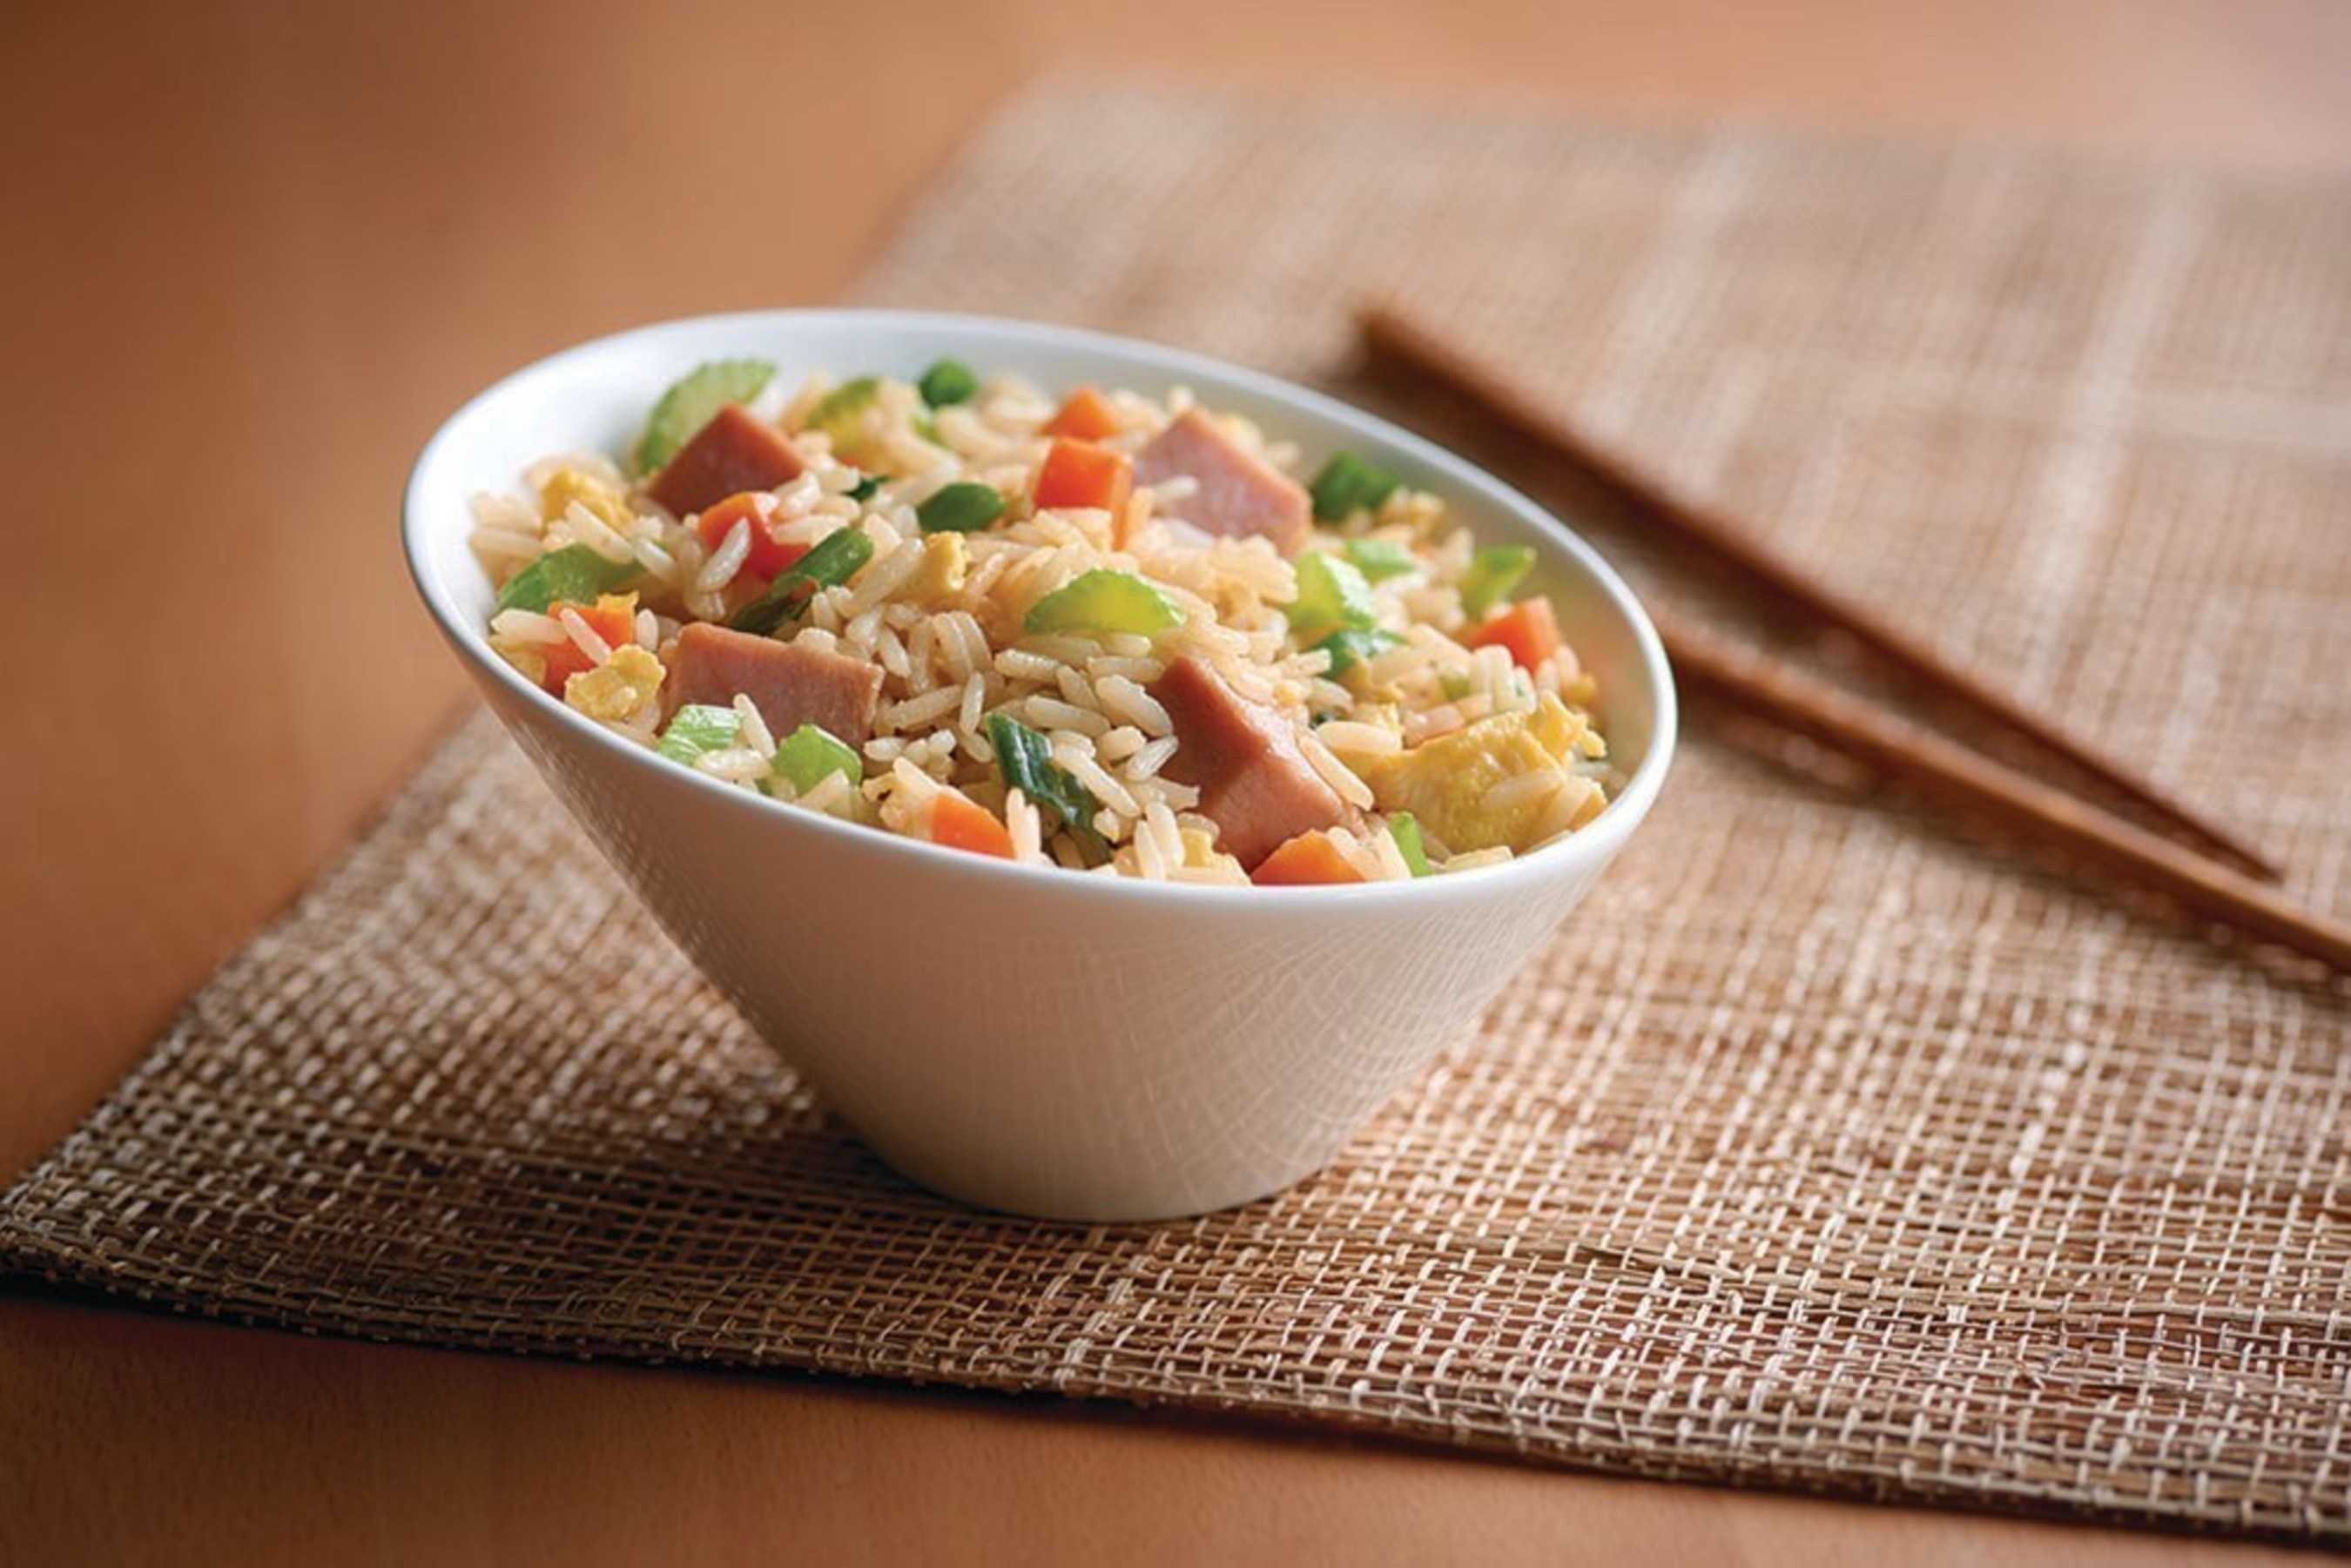 This September, Minute Rice celebrates National Rice Month with the new Minute Rice Family Size Bowl, available in whole grain brown rice and white rice options. Try this Speedy Ham Fried Rice for a quick, convenient and delicious meal your entire family will love.